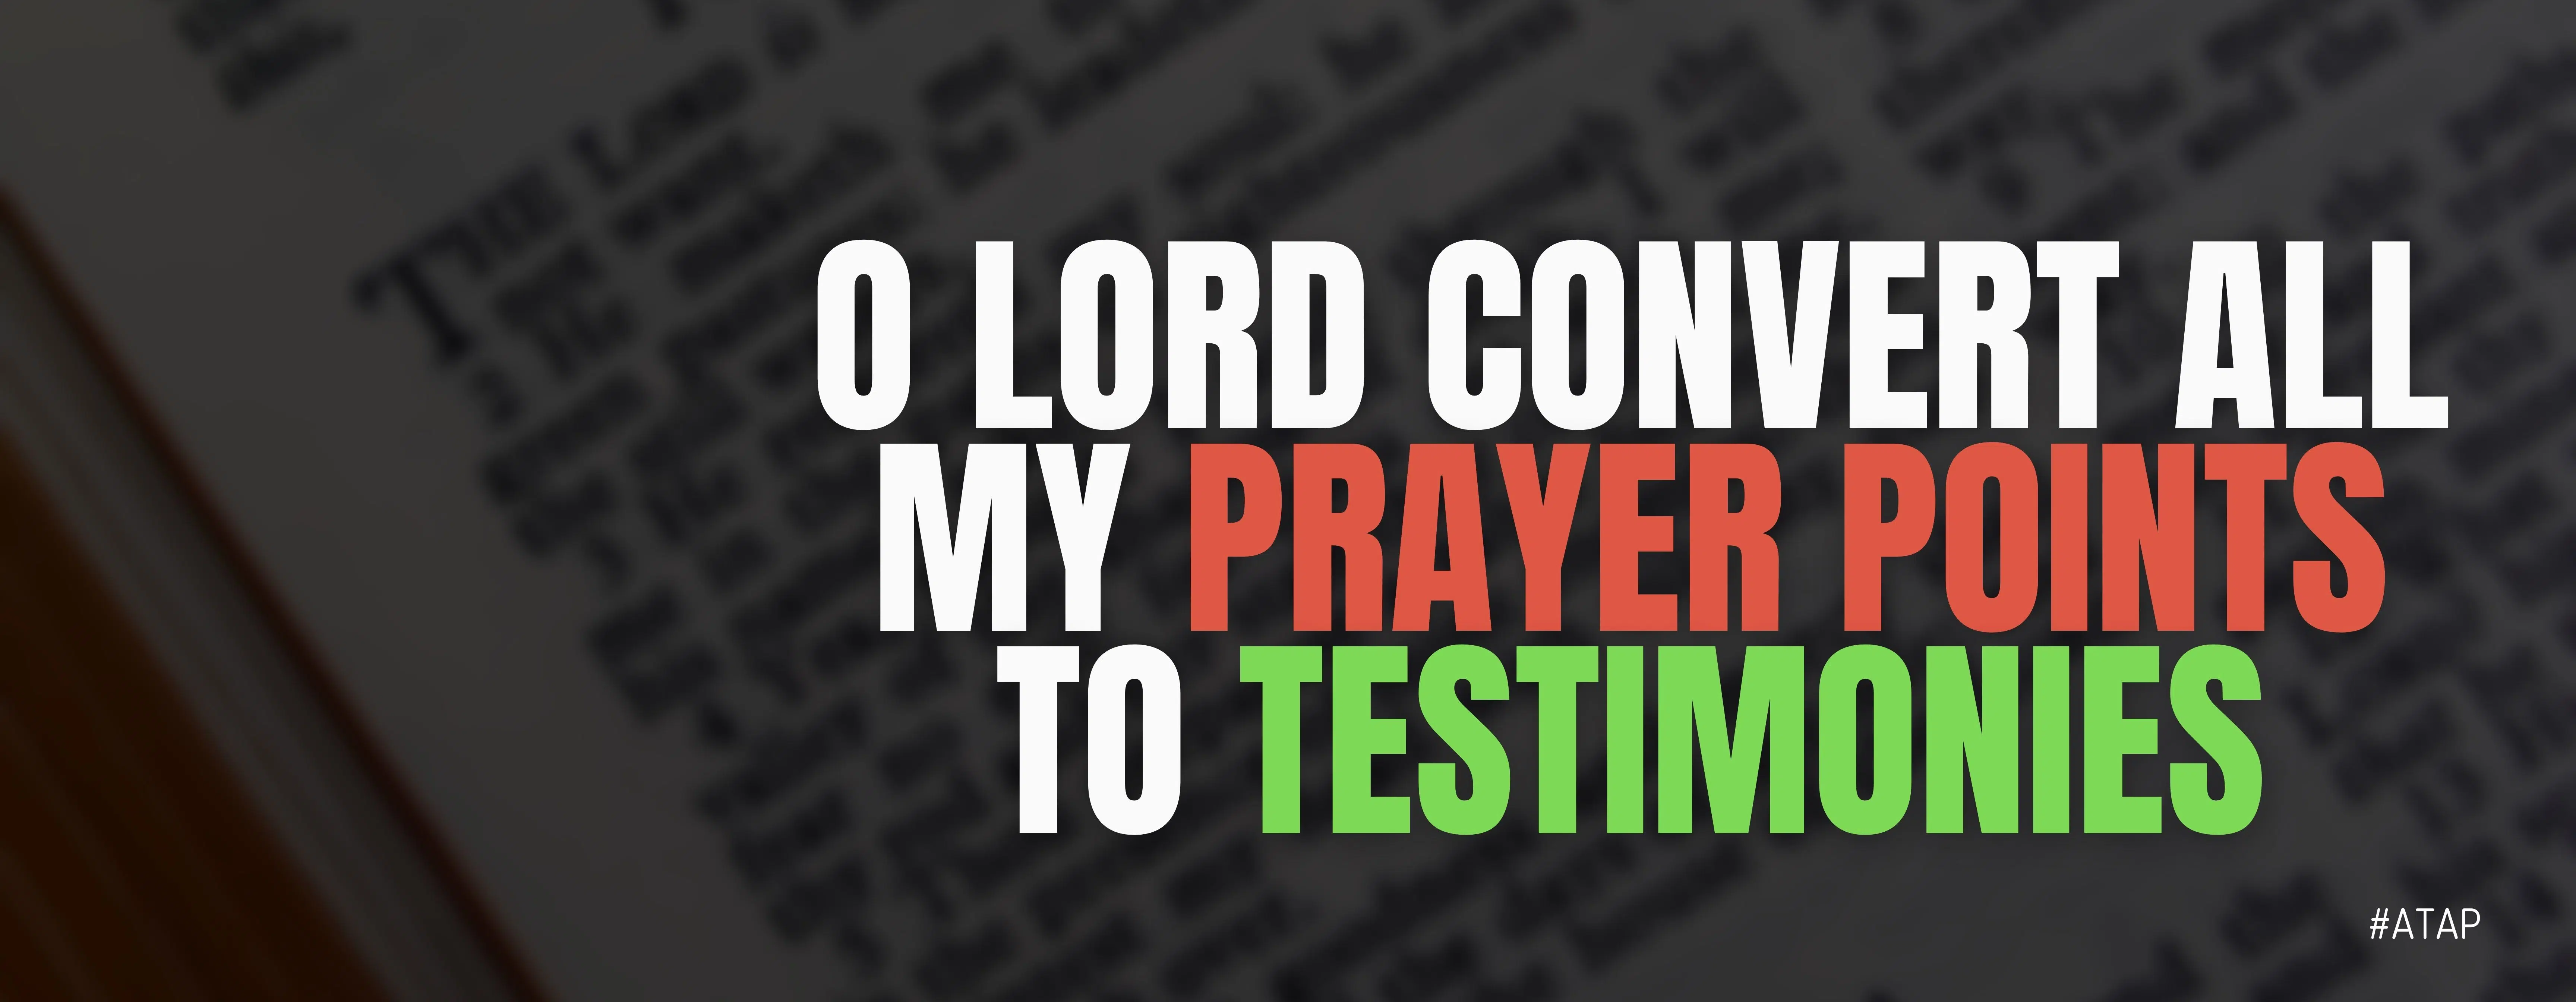 O Lord Convert All My Prayer Points To Testimonies